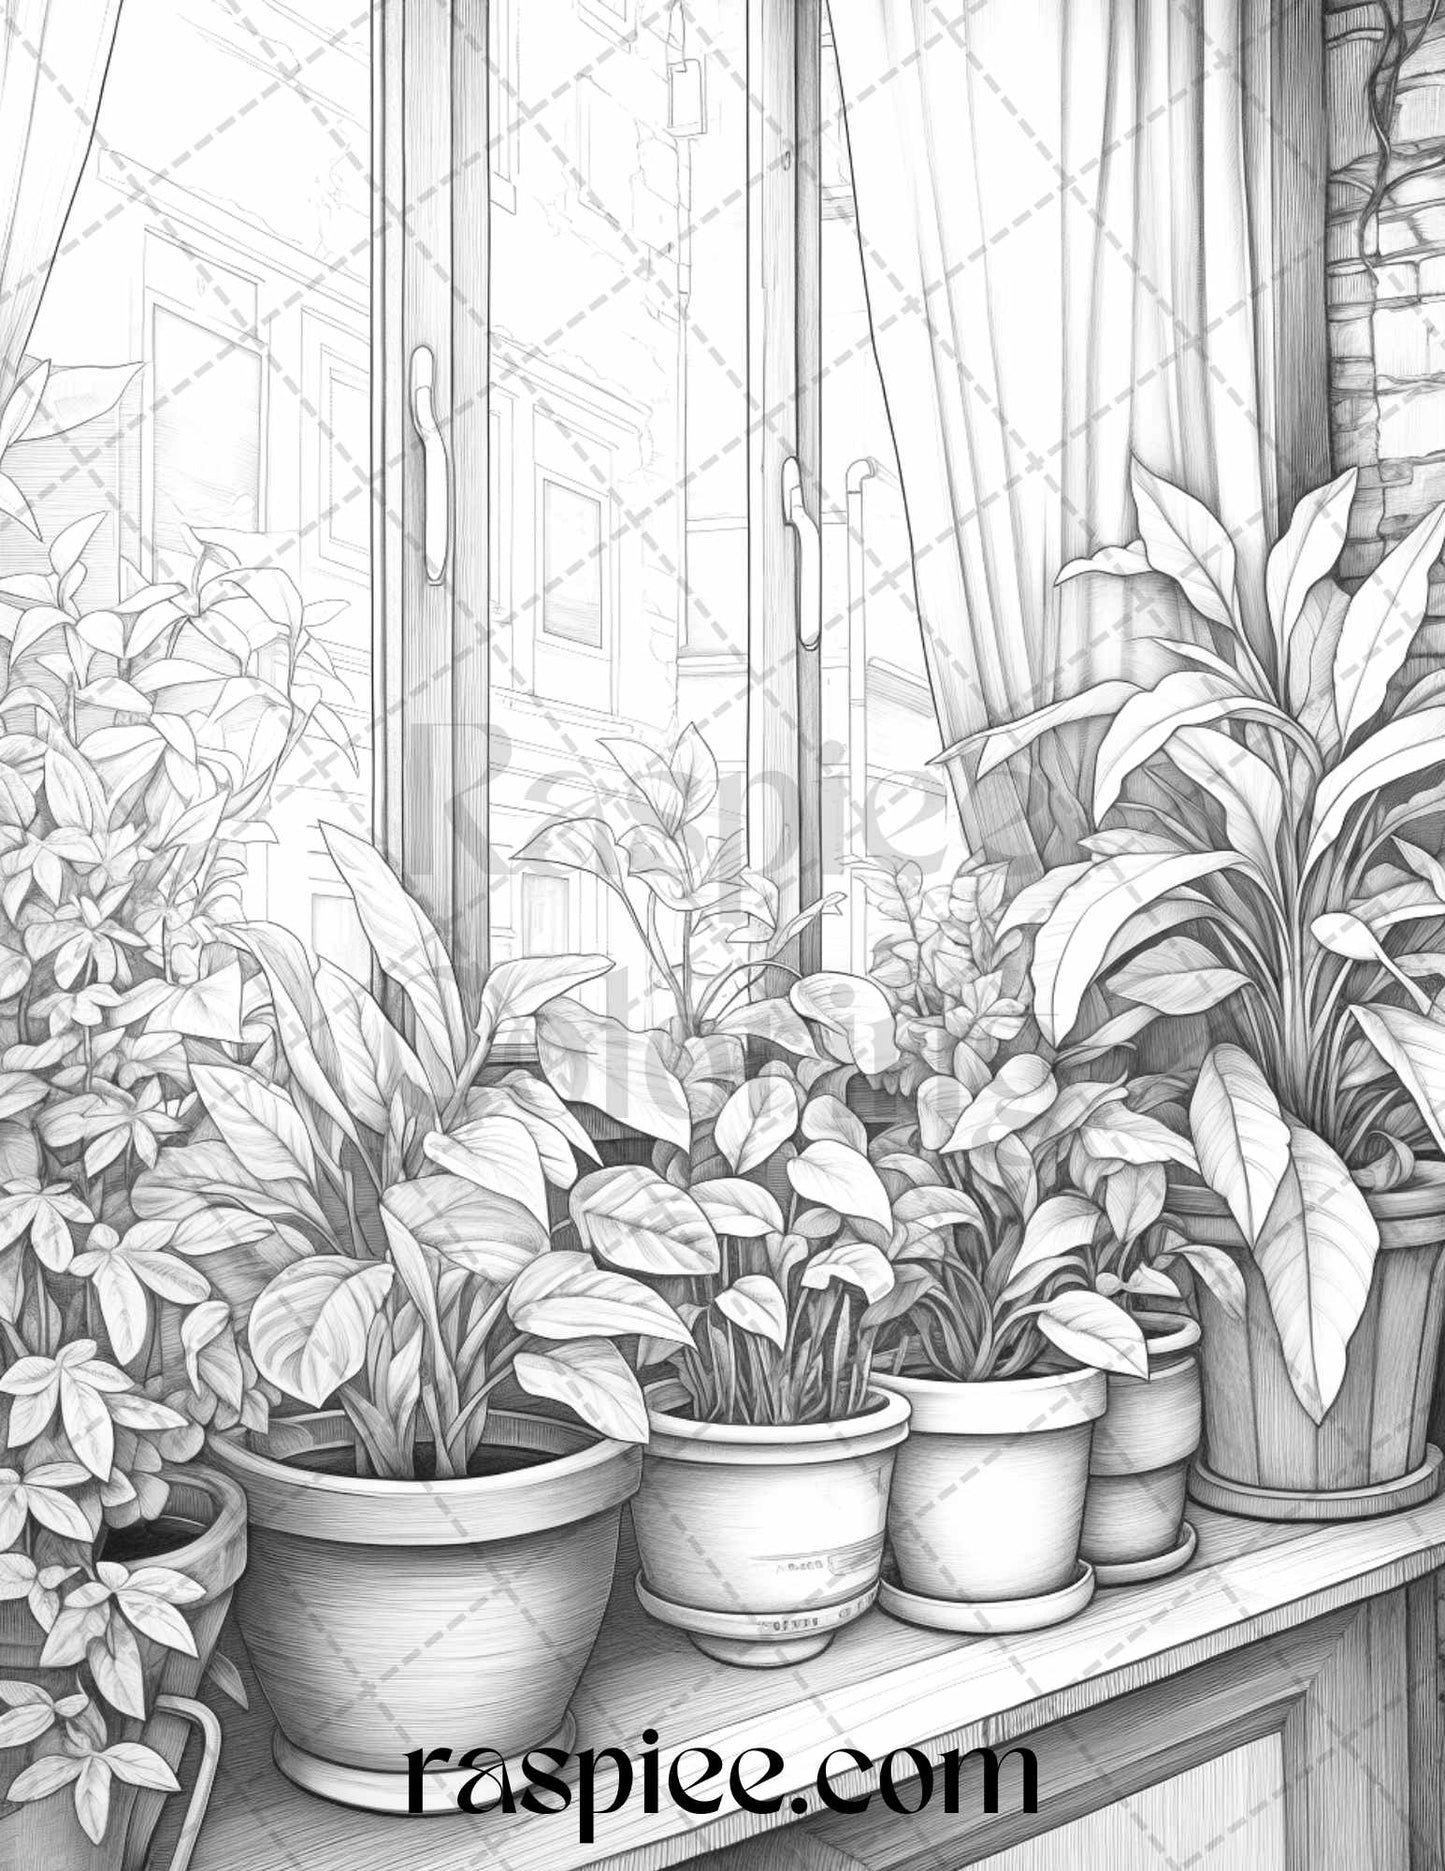 Window Plants Grayscale Coloring Pages Printable for Adults, Relaxing Nature Art, Botanical Coloring Pages, Stress Relief Coloring